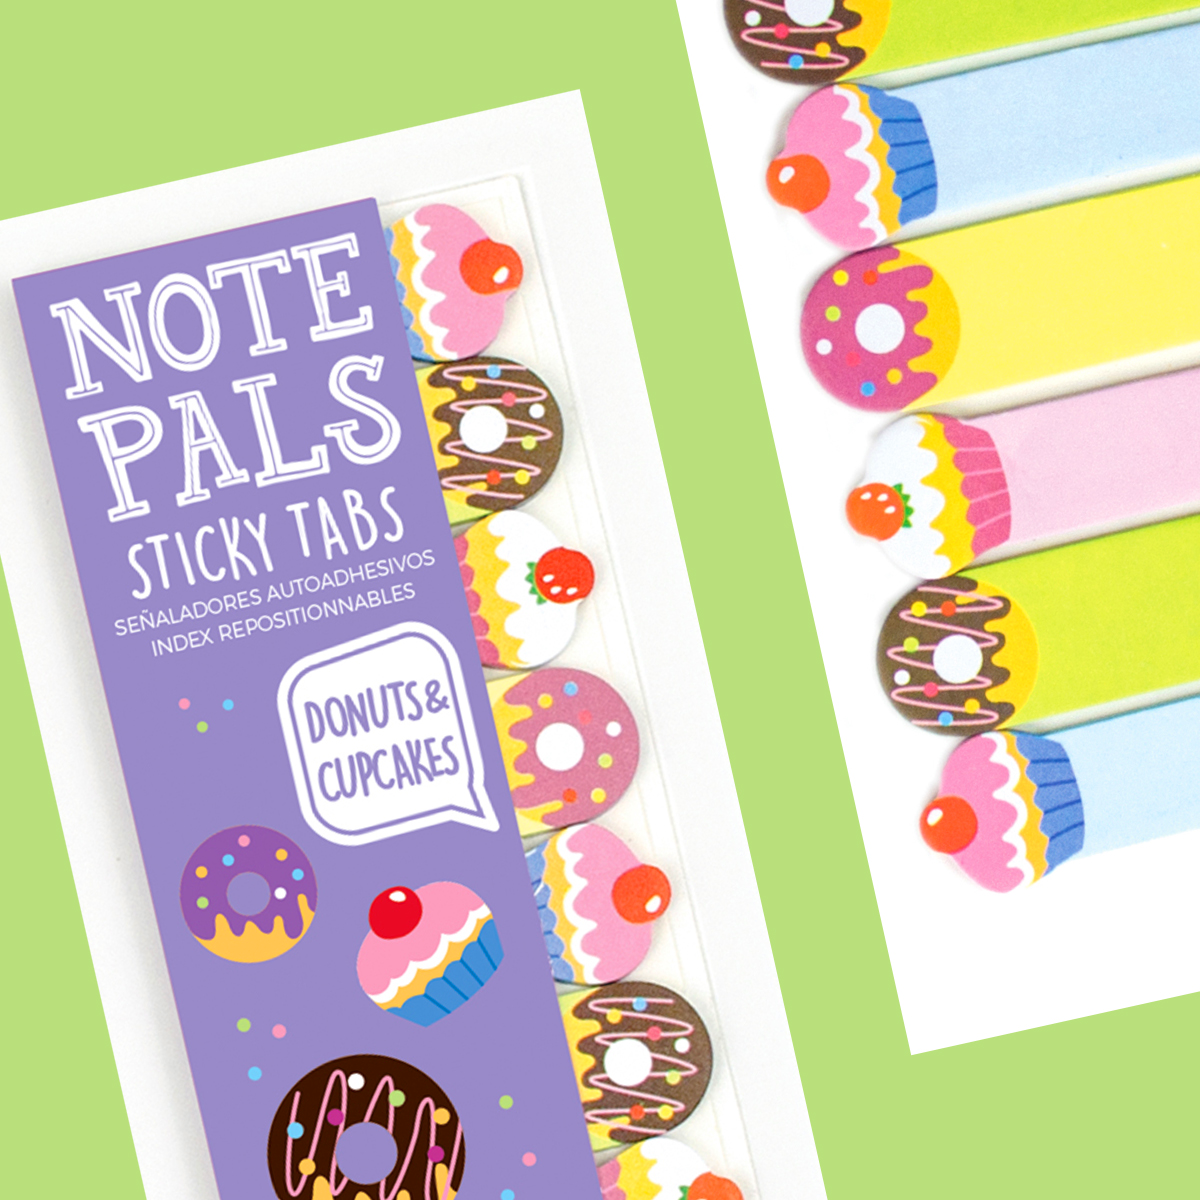 Note Pals Sticky Tabs Donuts and Cupcakes